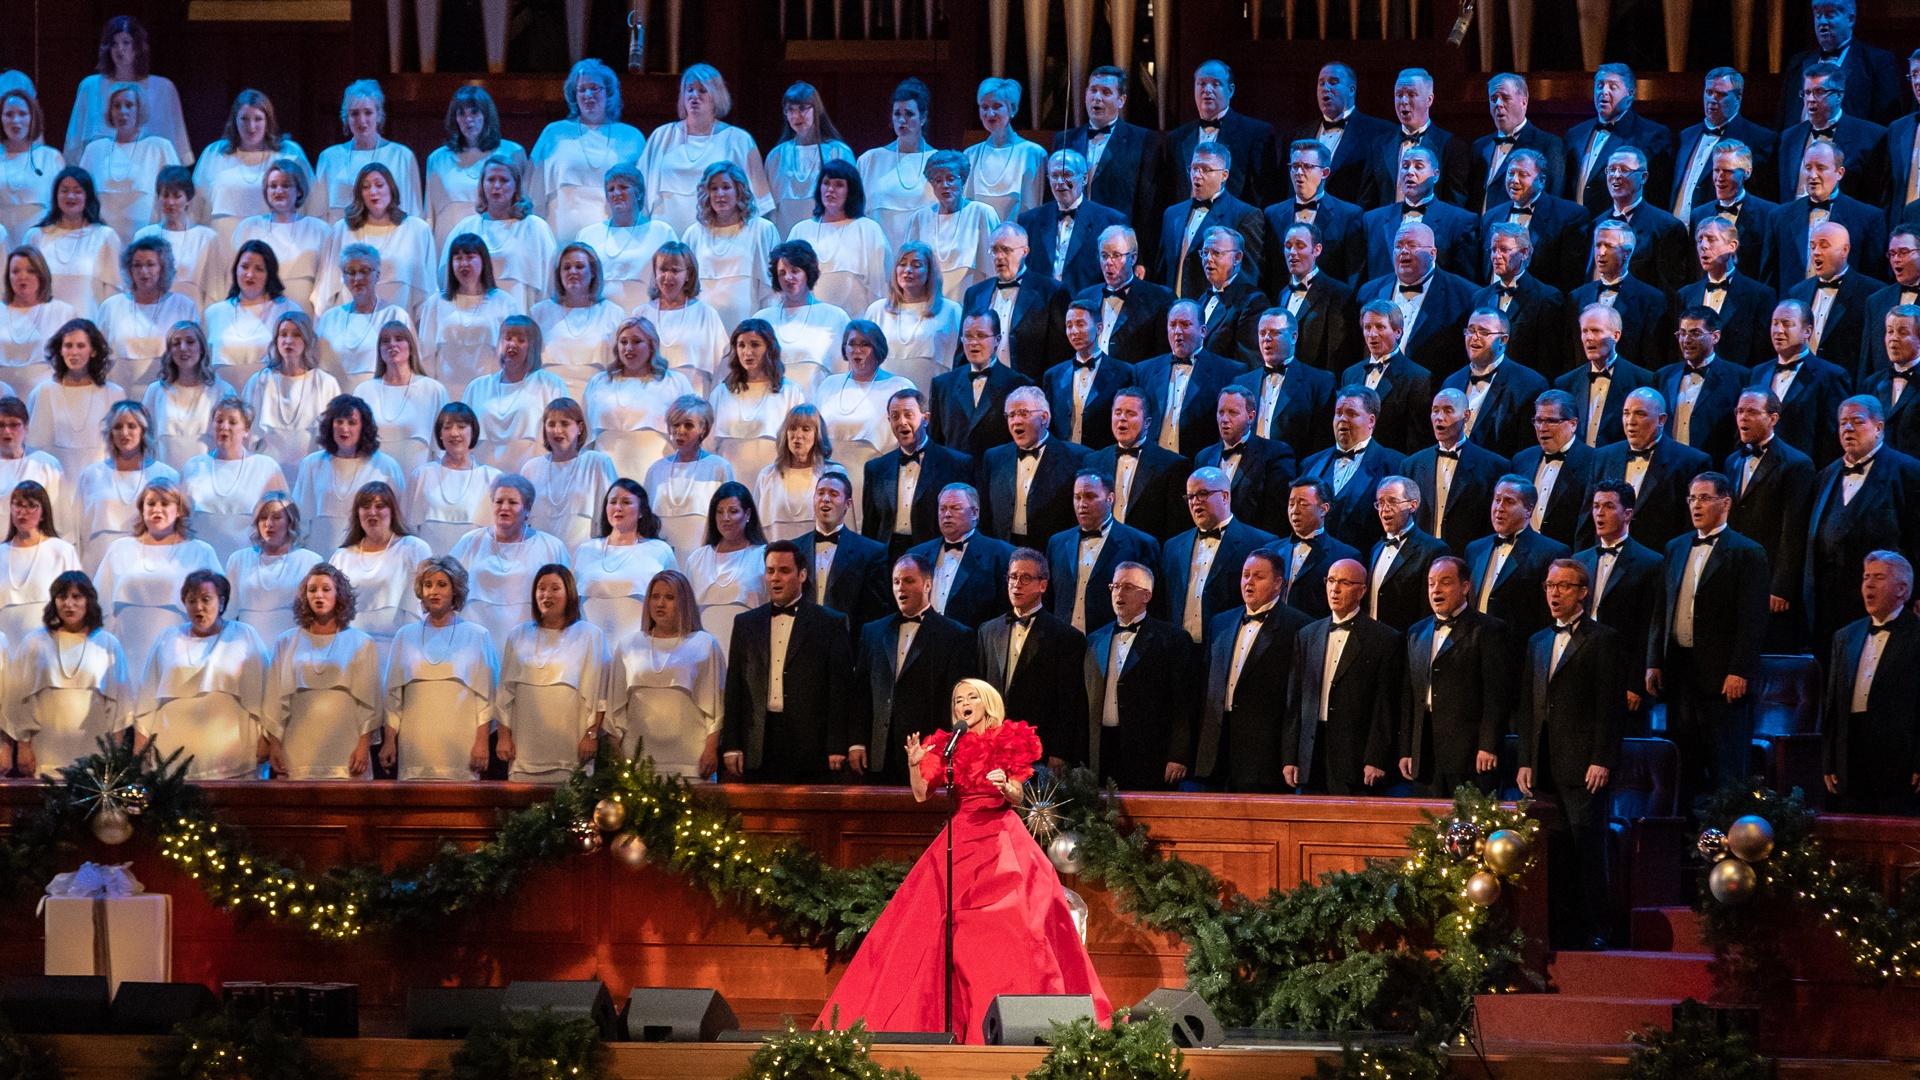 The Tabernacle Choir & Orchestra at Temple Square performing "Mary, Did You Know?"